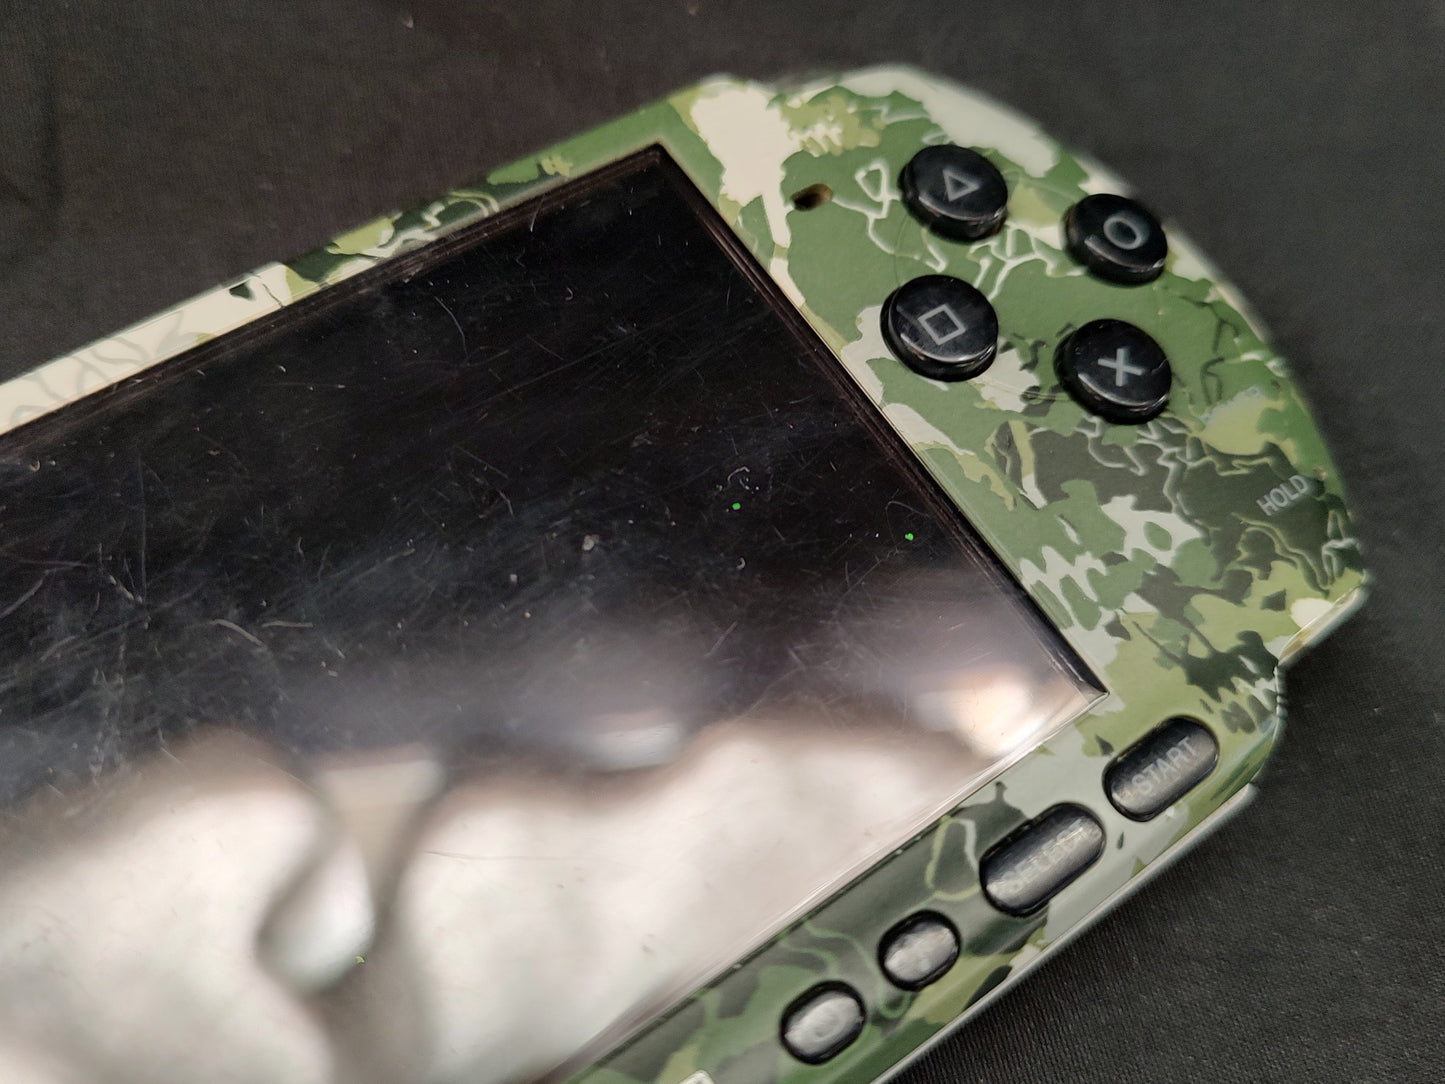 SONY PSP-3000 Console METAL GEAR SOLID Portable Camouflage Ver, Working-g0104-